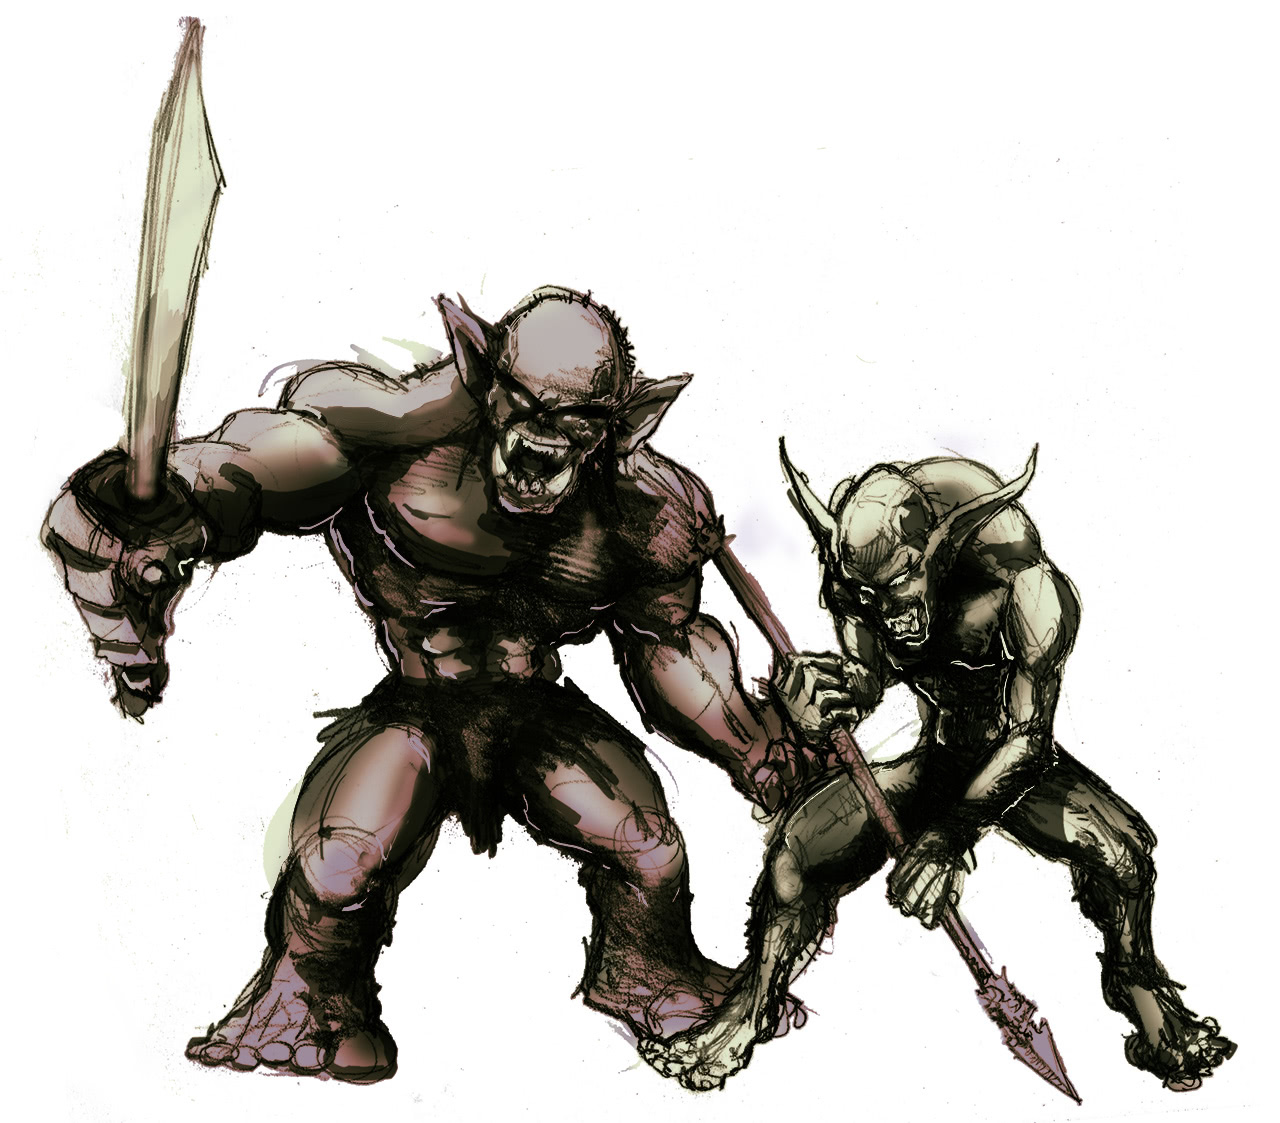 Picture of an orc and a goblin, armed.